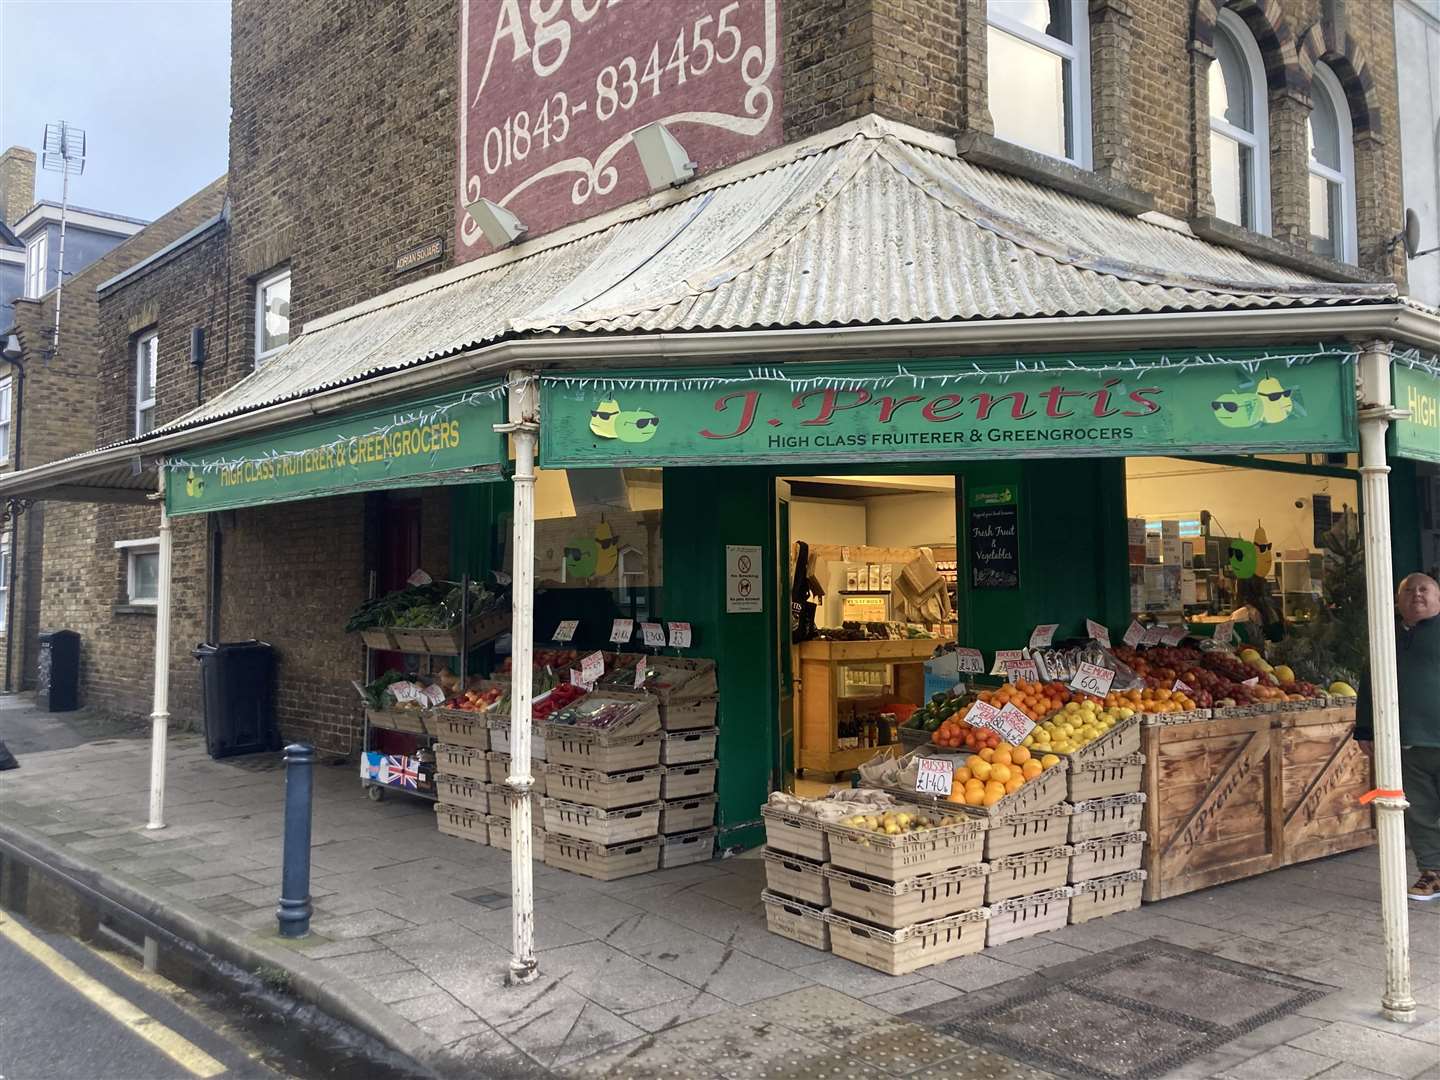 The greengrocers is on the corner of Adrian Square and Station Road in Westgate-on-Sea